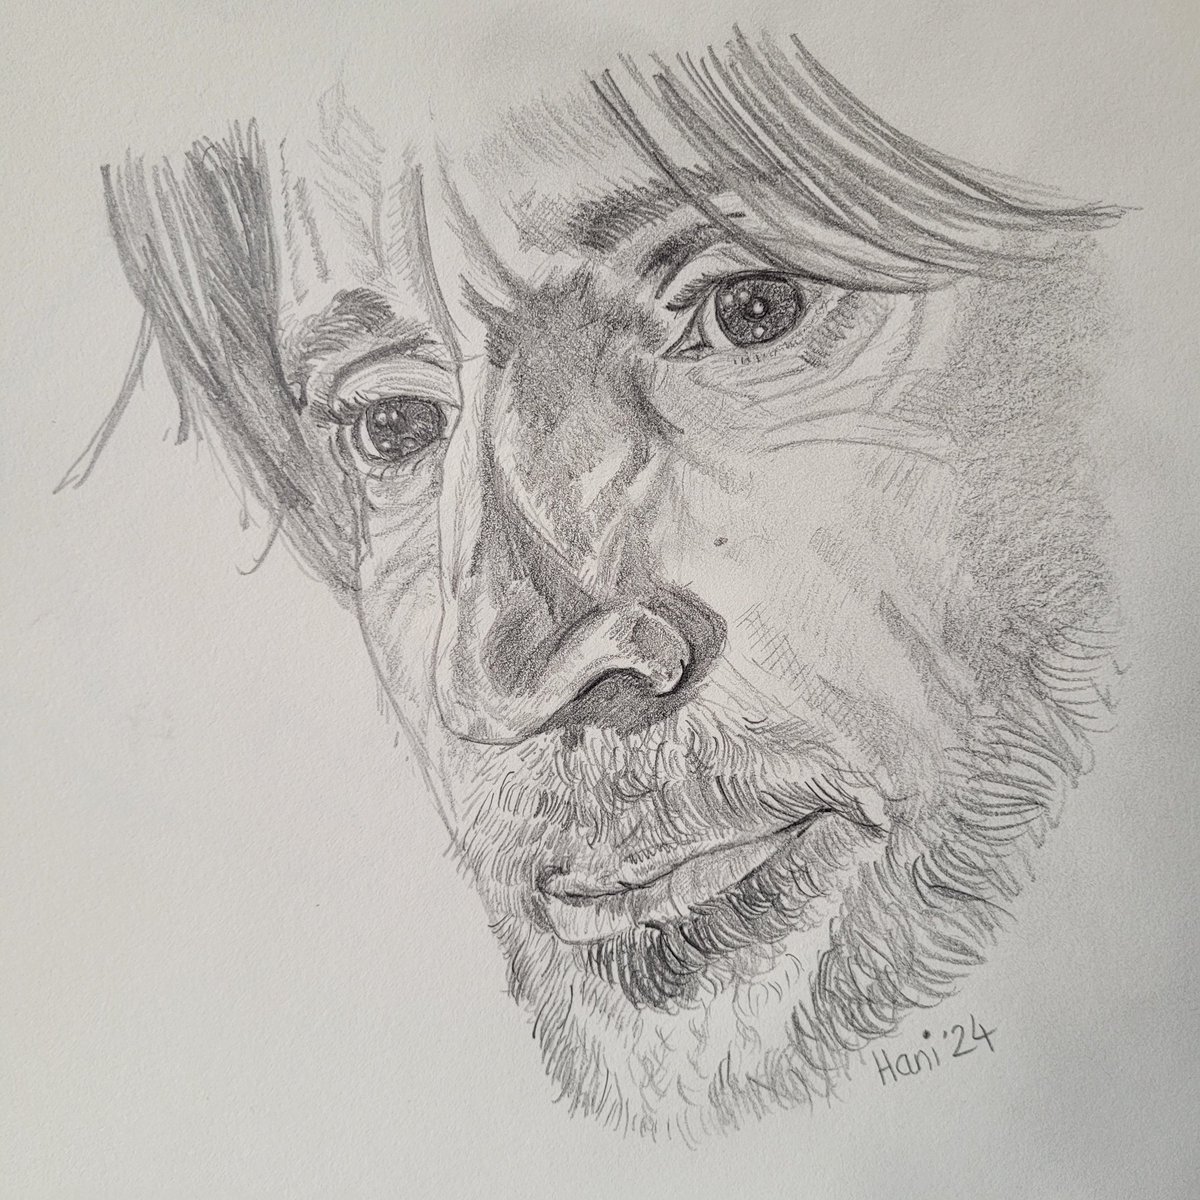 It's Robert Carlyle's birthday! So here's a wee sketch of him